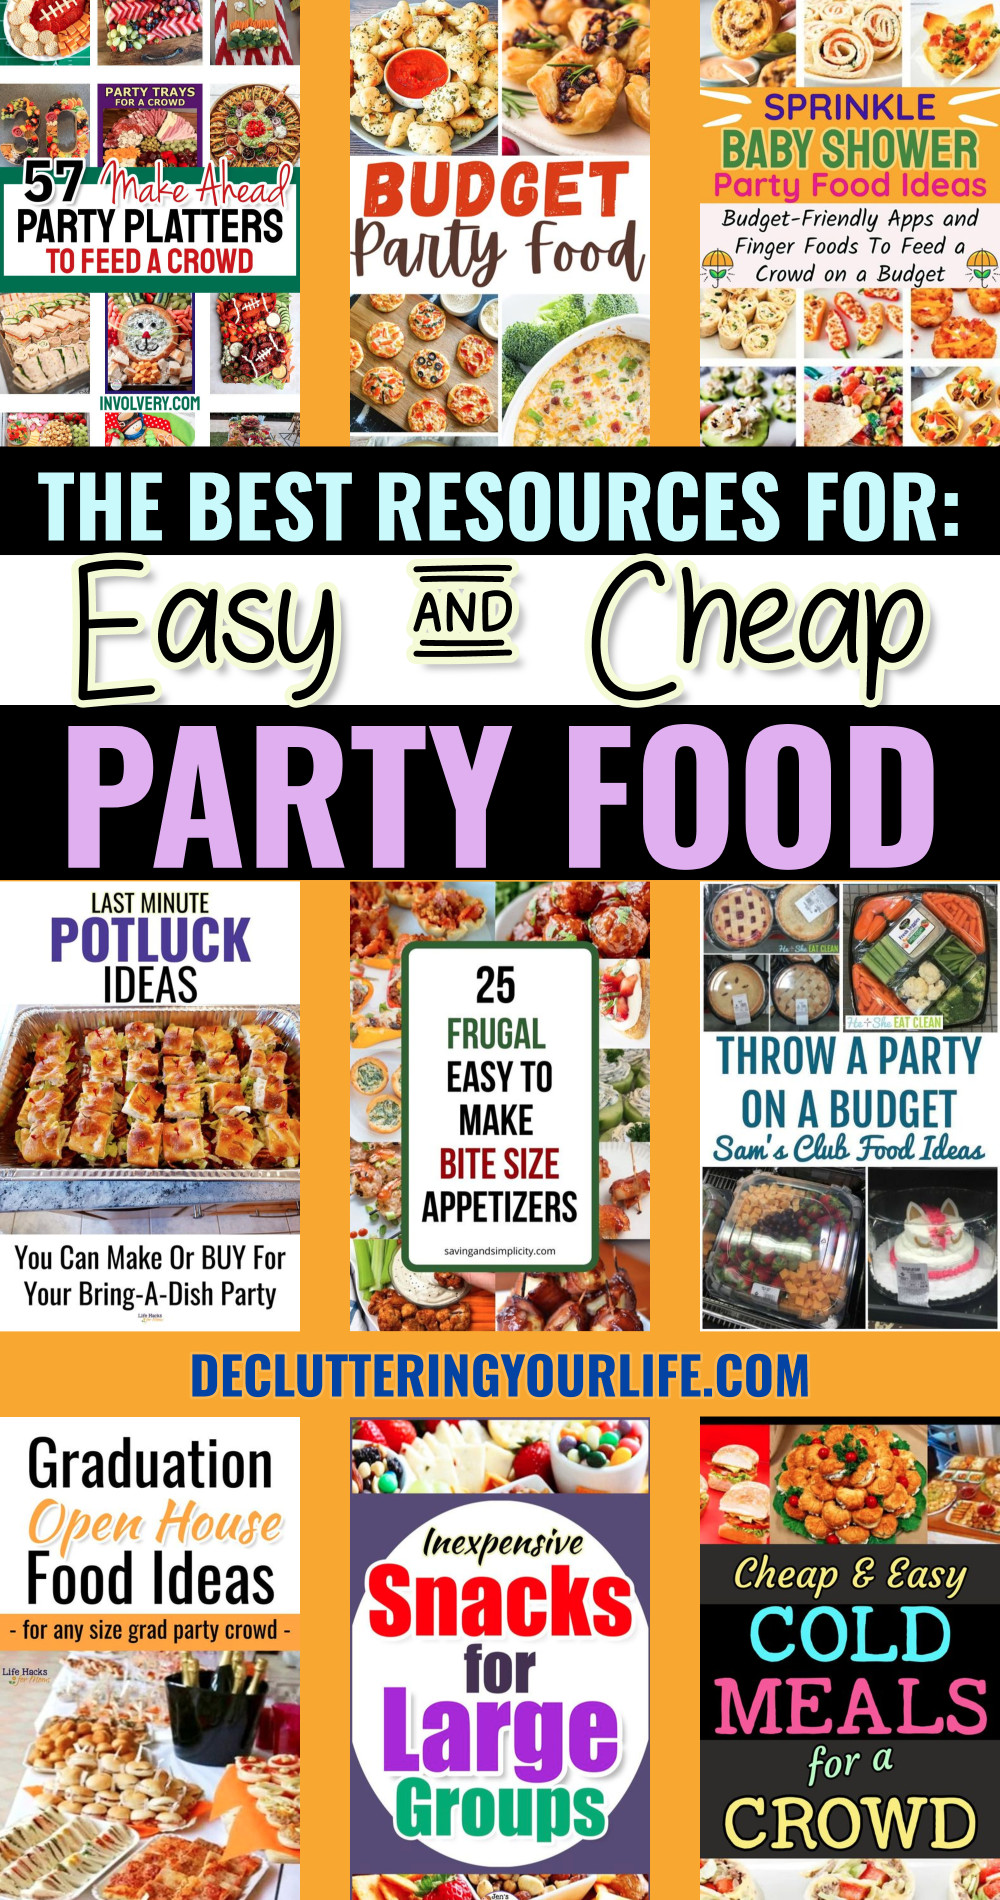 Resources for easy and cheap party food